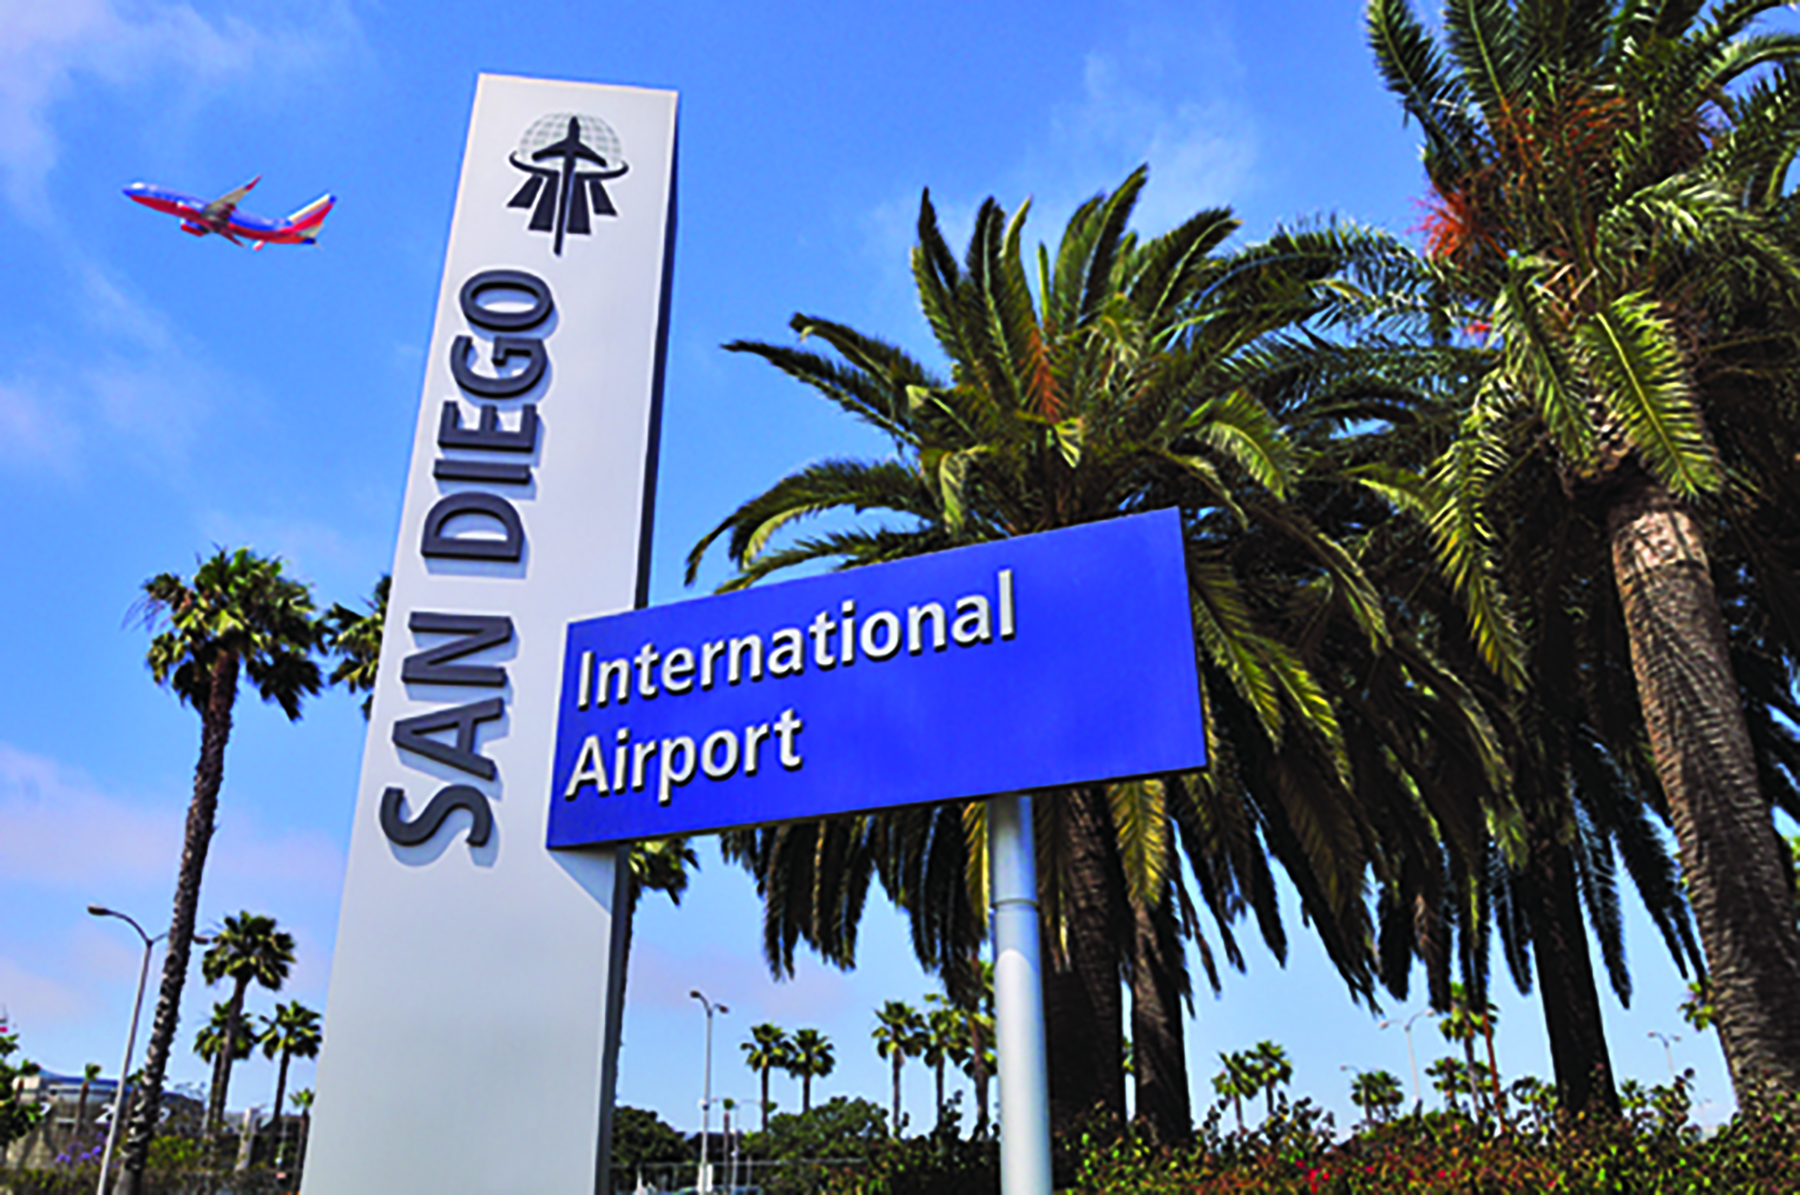 San Diego International Airport sign with plane